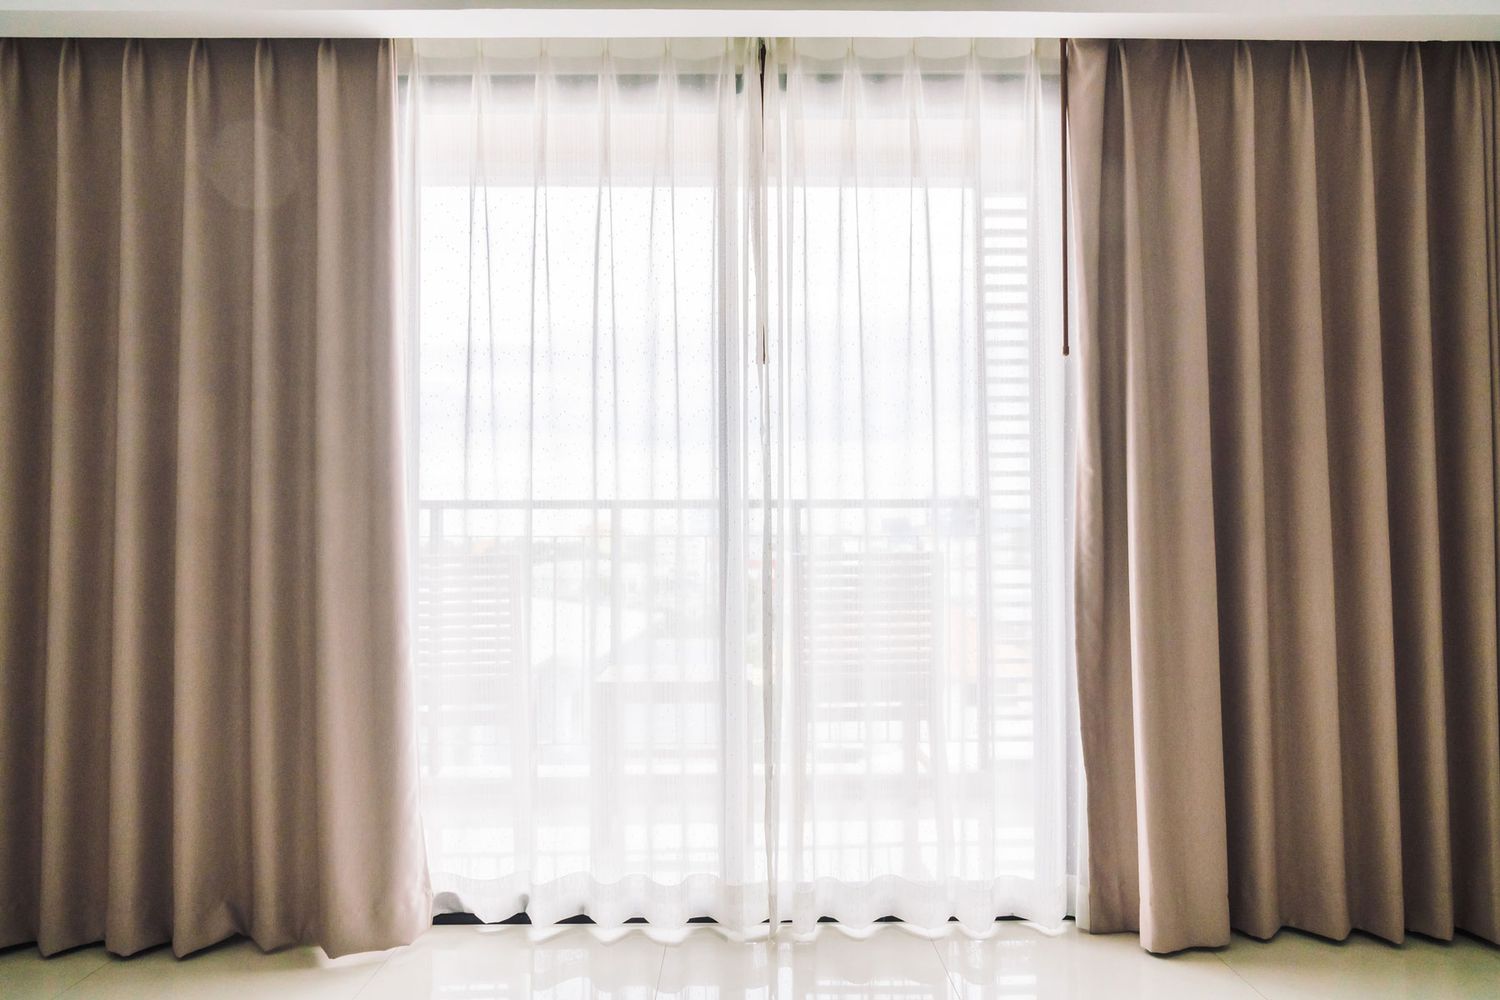 Curtains and Window Treatments Guide - How long should curtains be